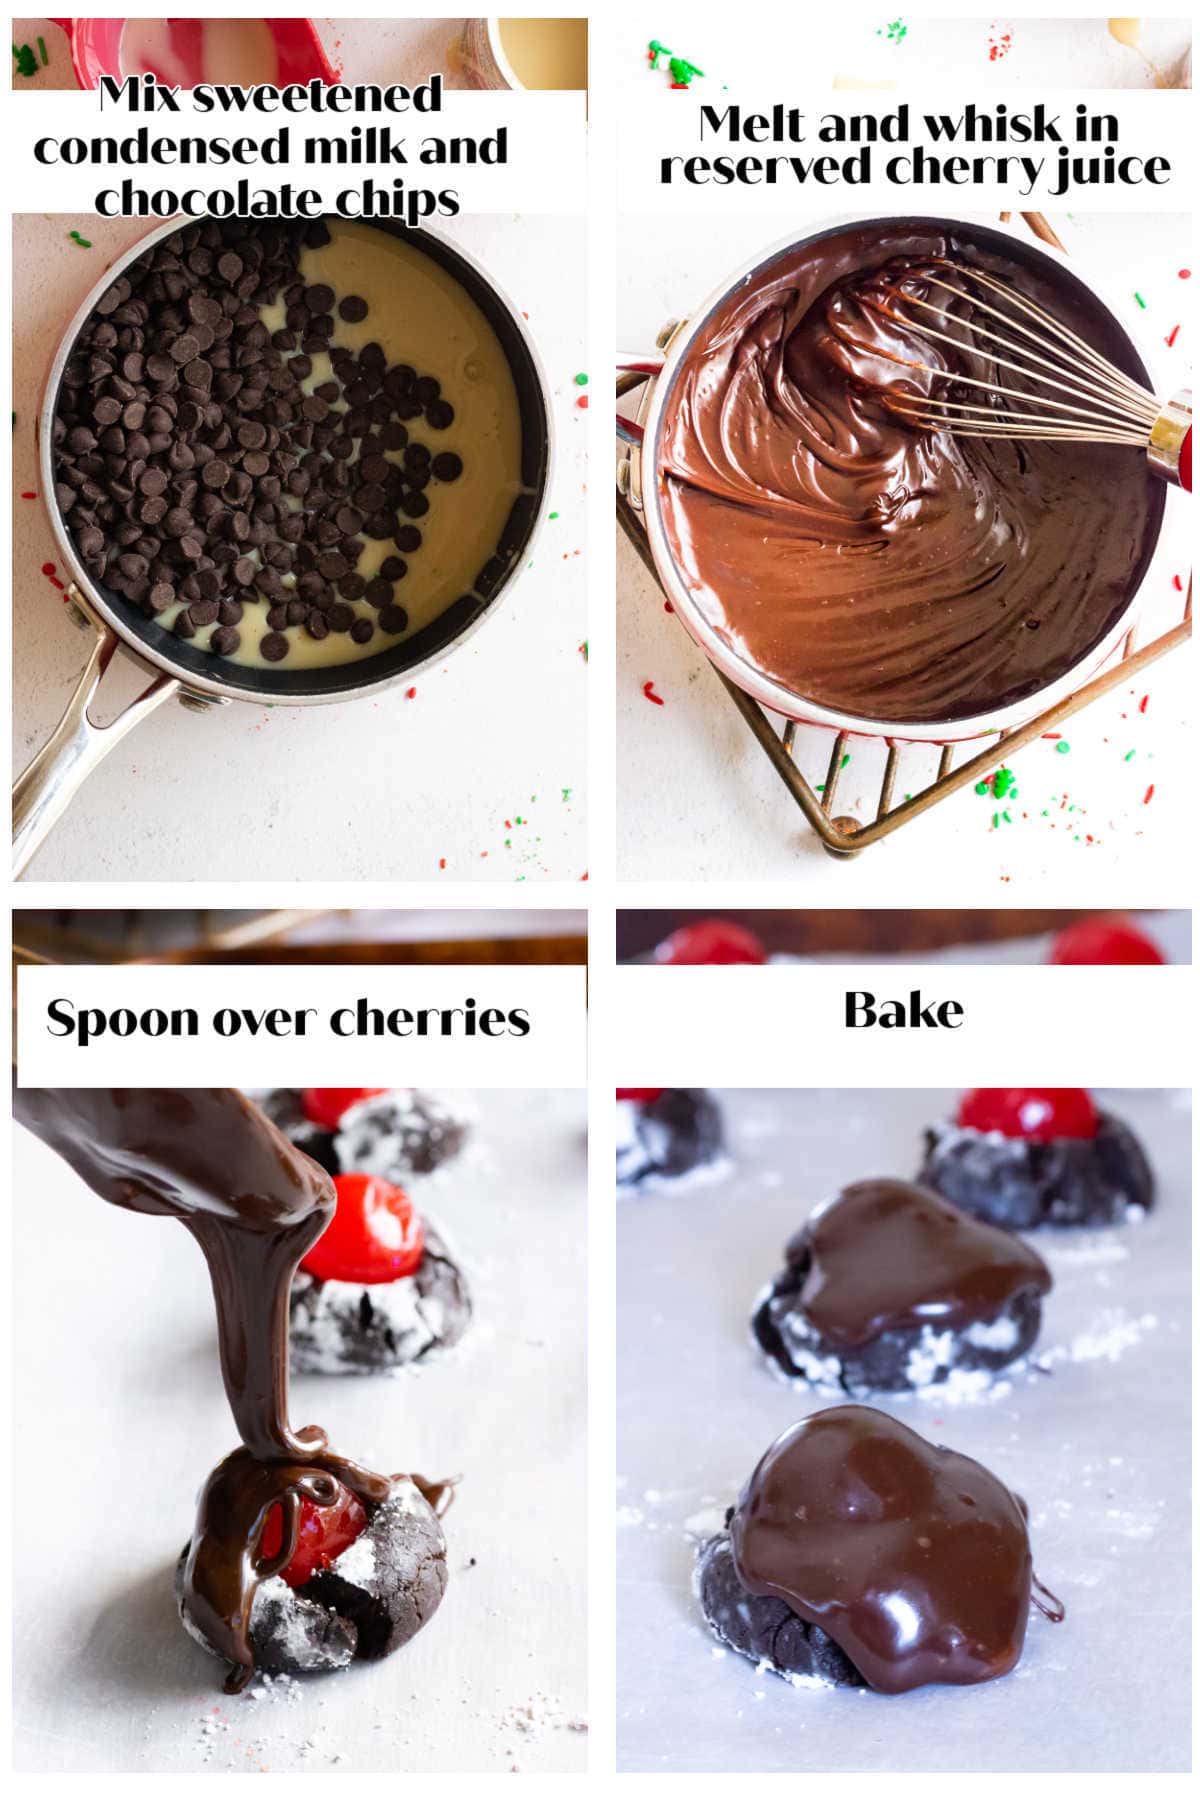 Step by step images for how to make the ganache and cover the cherries.